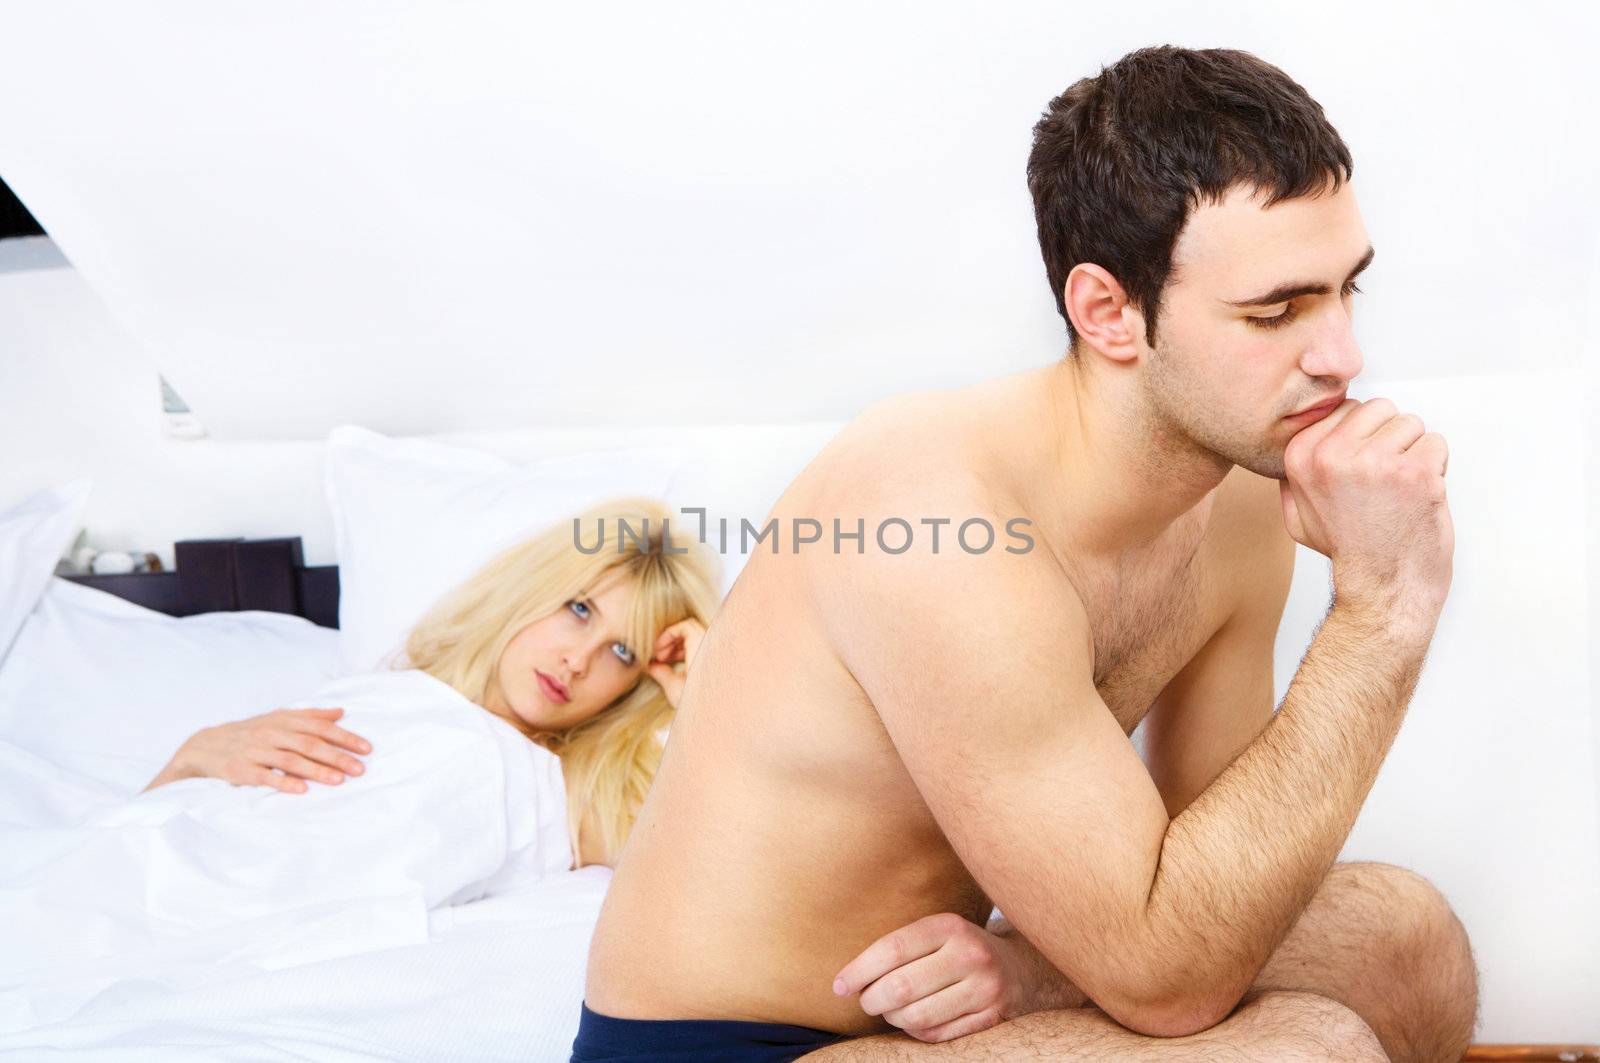 problems of a young couple in bedroom, focus on male